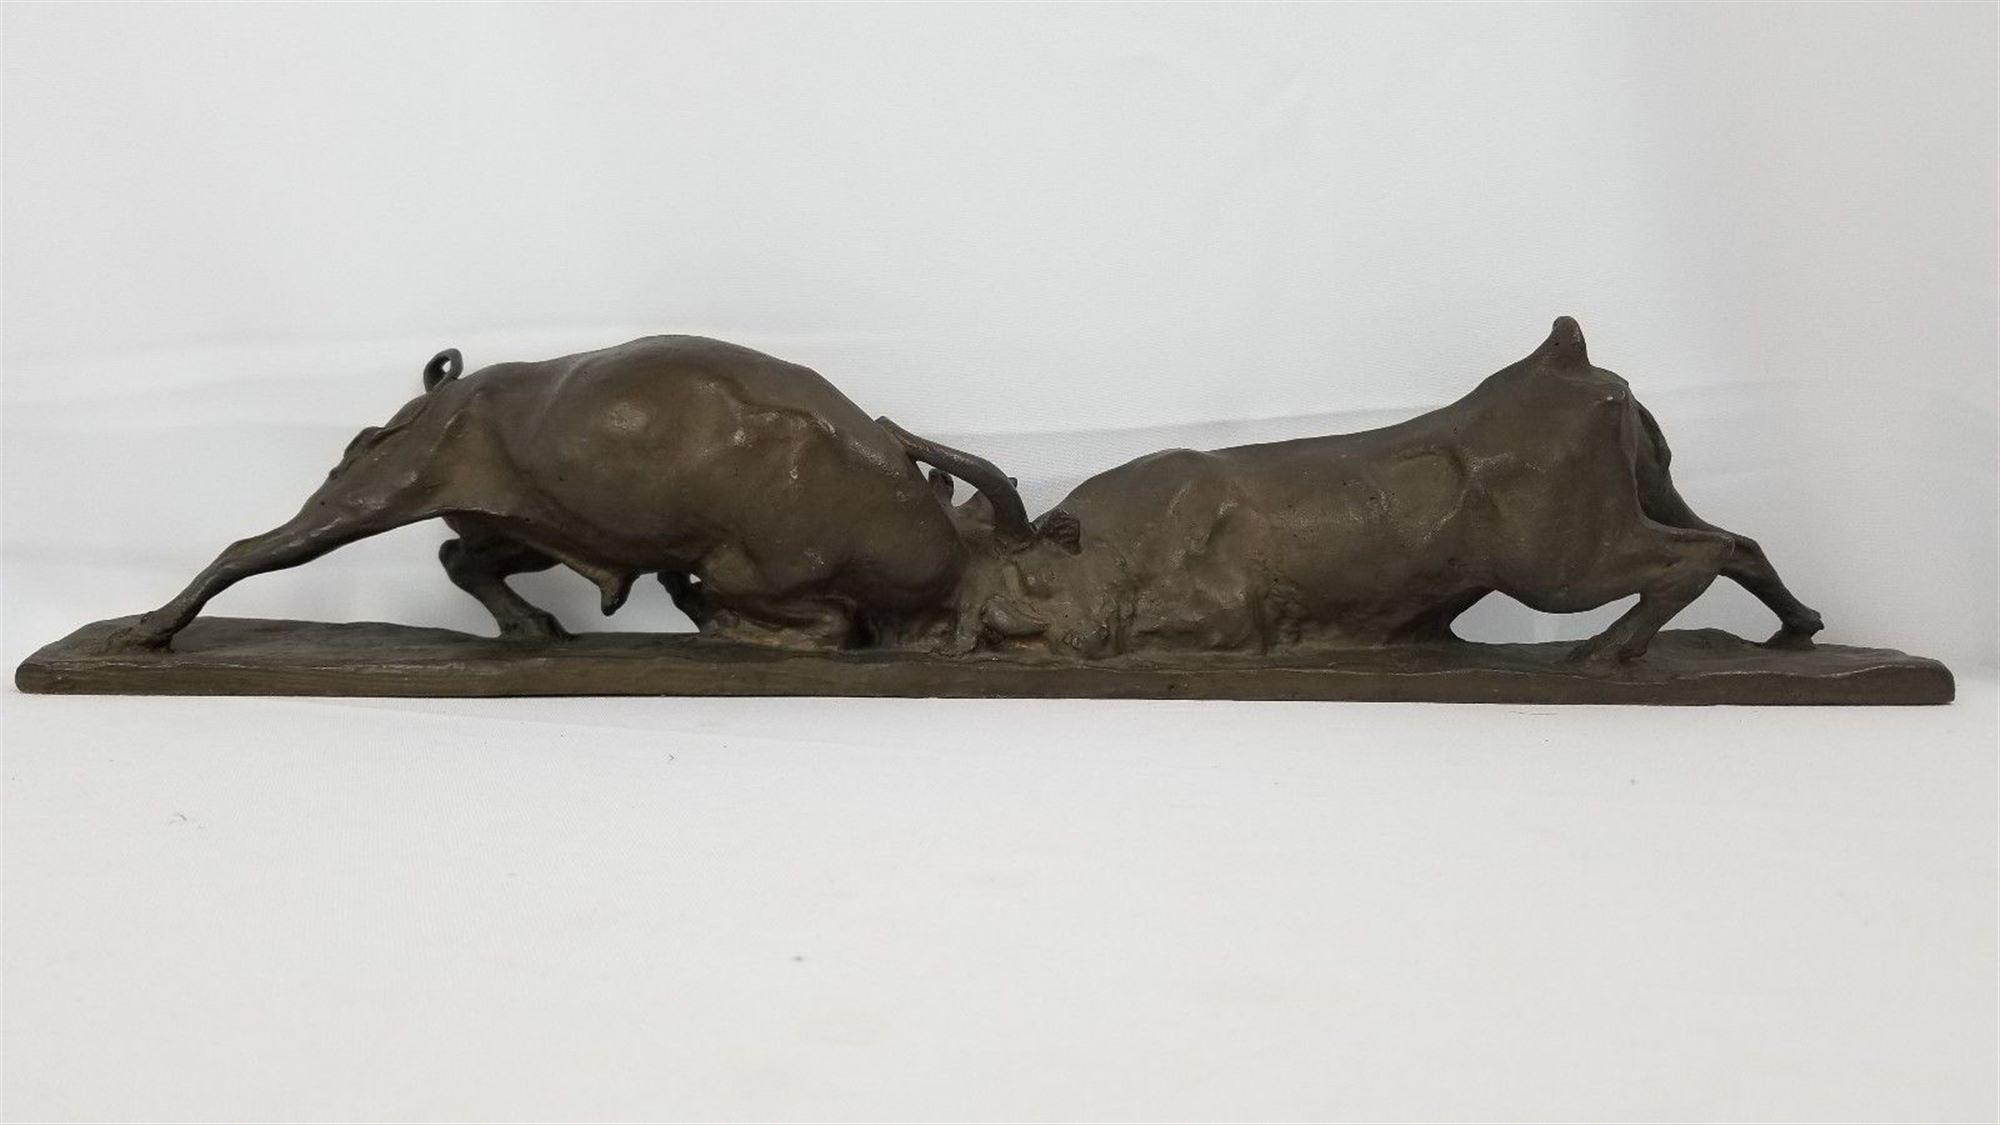 

											</b>

											<em>
												Lure of the West: Celebrating 50 Years of Gerald Peters Gallery  </em> 

											<h4>
												New York: April 29 - May 27, 2022											</h4>

		                																																<i>Solon Hannibal Borglum, Bulls Fighting,</i>  
																																								modeled 1899, cast 1902, 
																																								bronze, 
																																								4 x 20 ½ inches 
																								
		                				